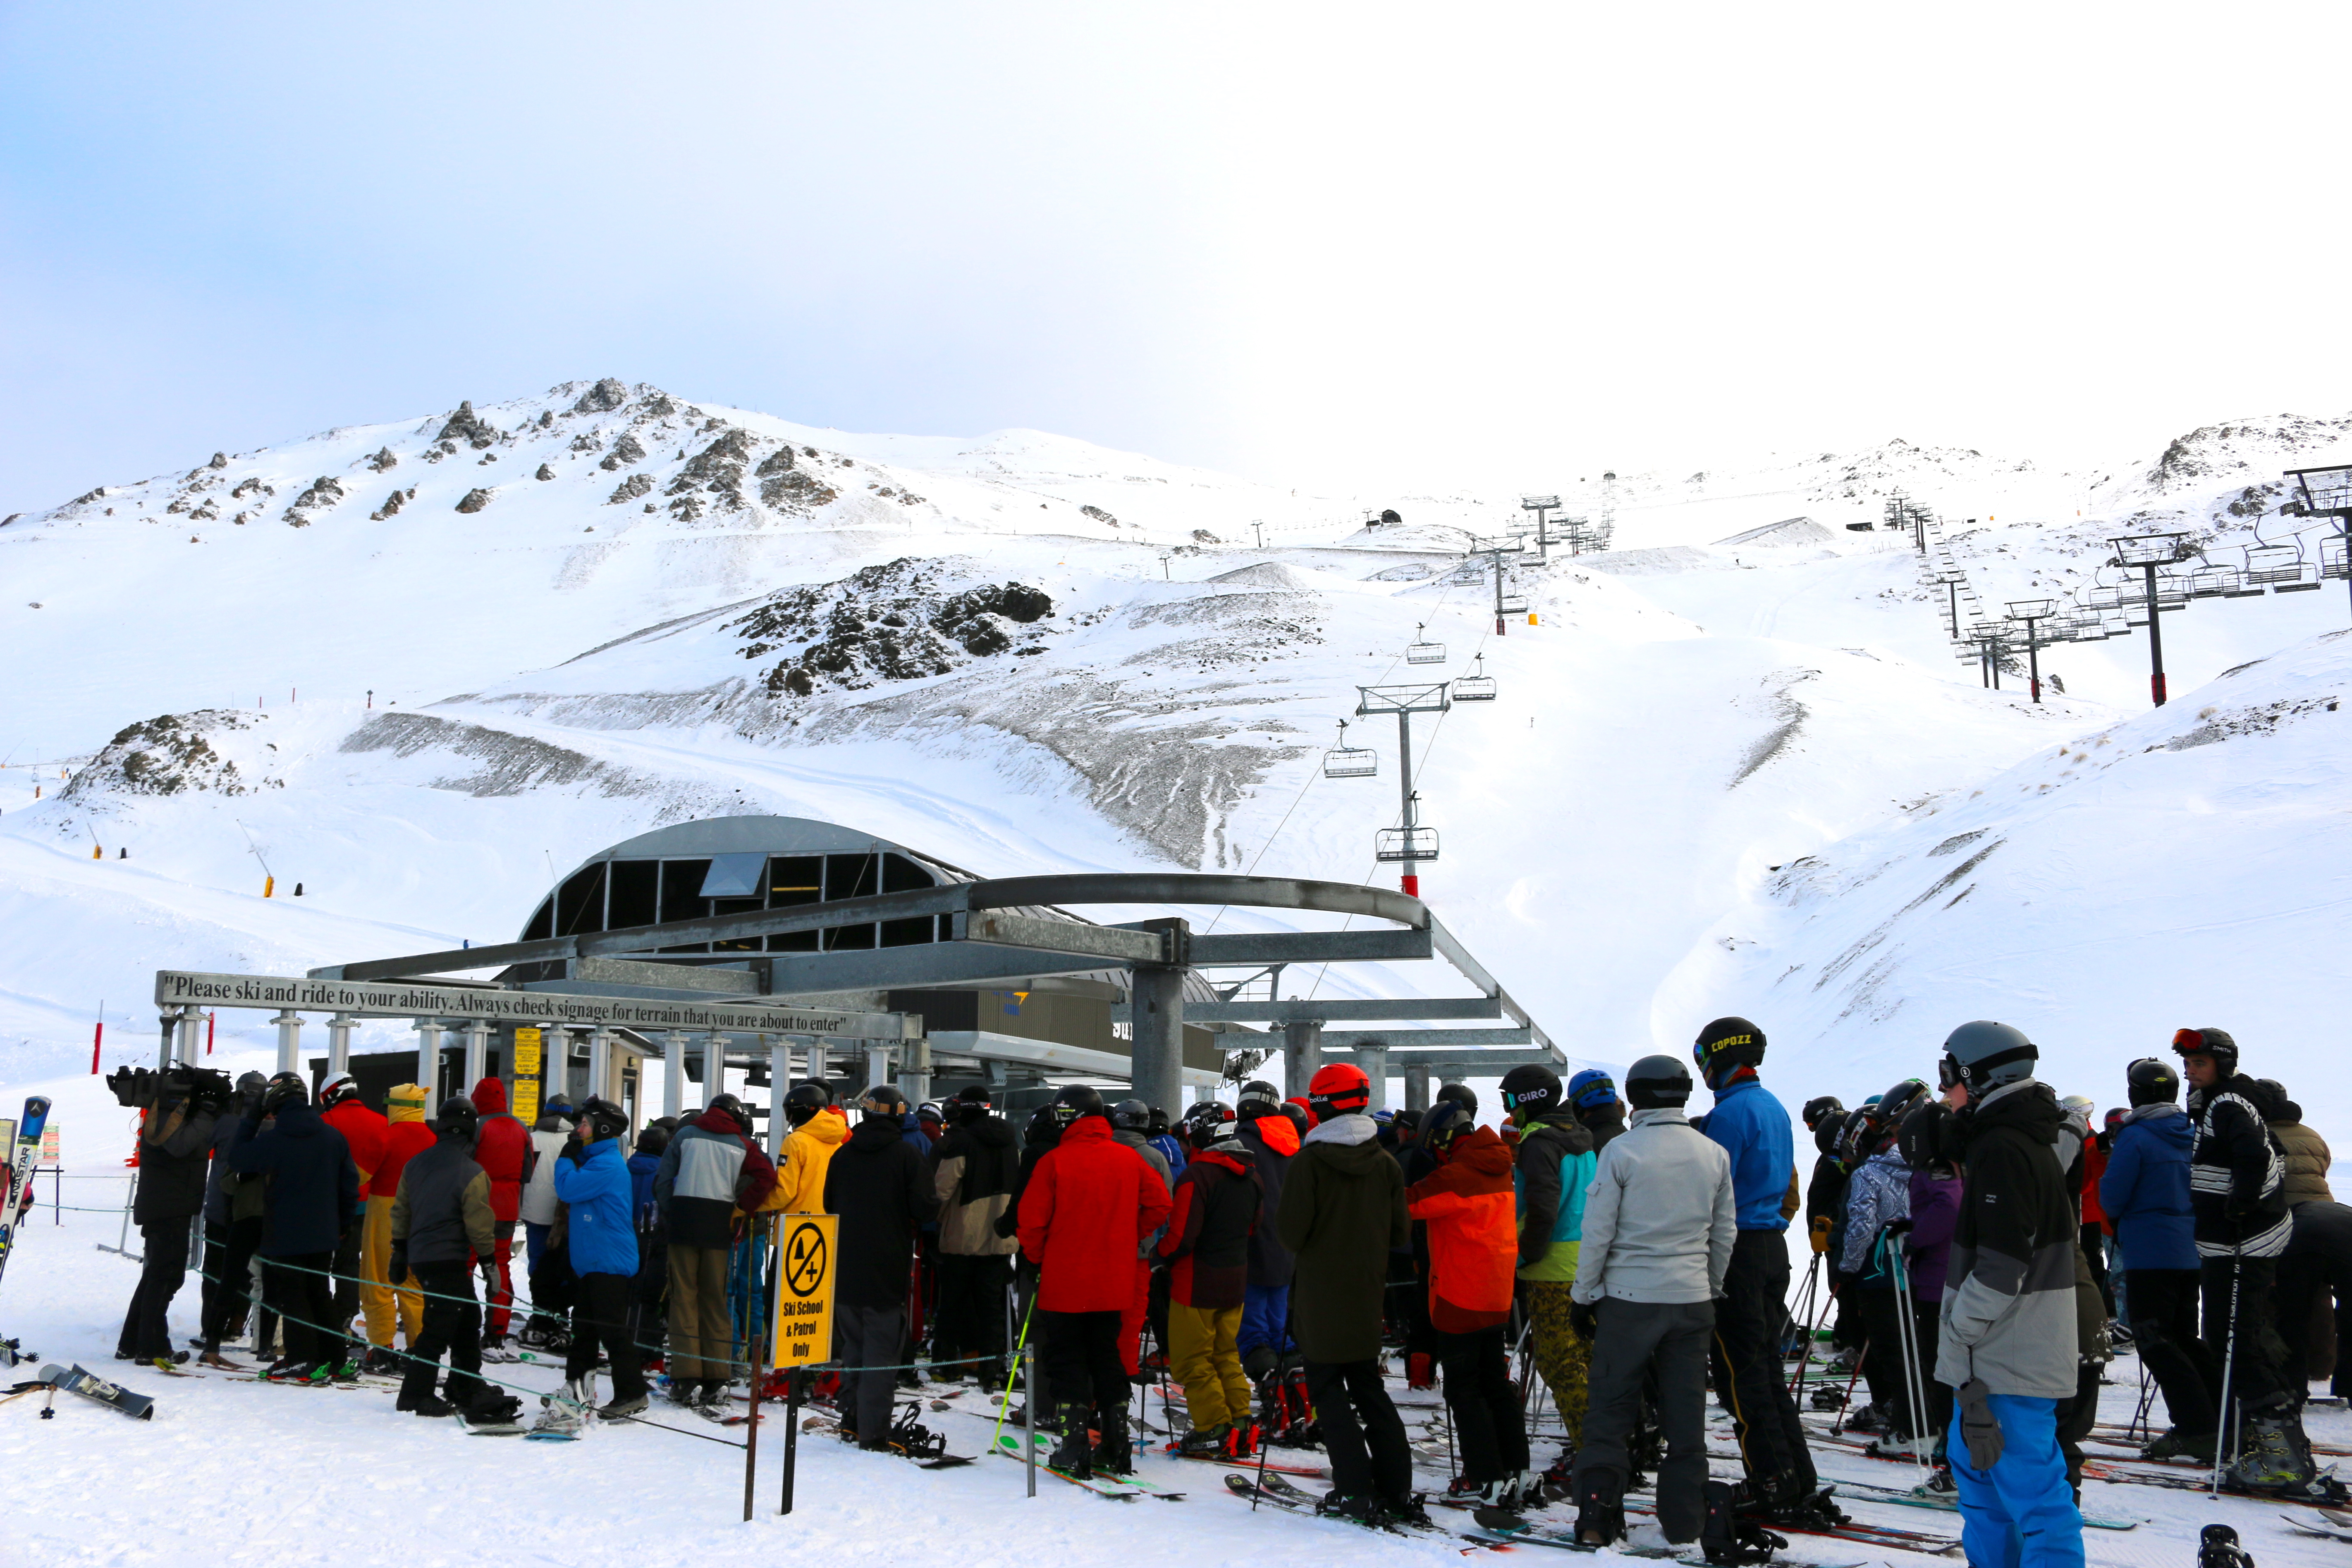 Record conditions and multi-million-dollar upgrades celebrated at Mt Hutt’s open day